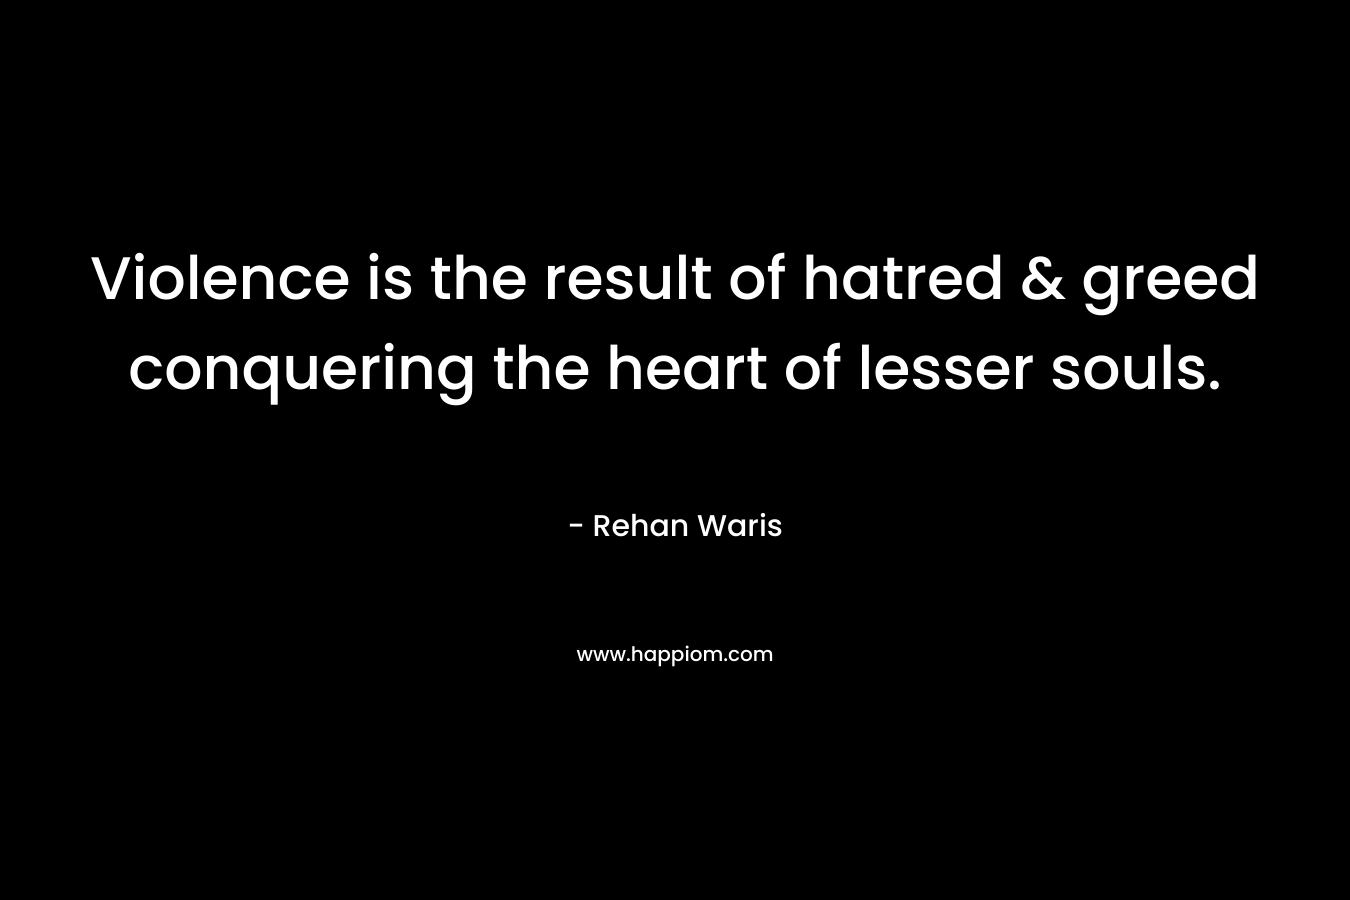 Violence is the result of hatred & greed conquering the heart of lesser souls.